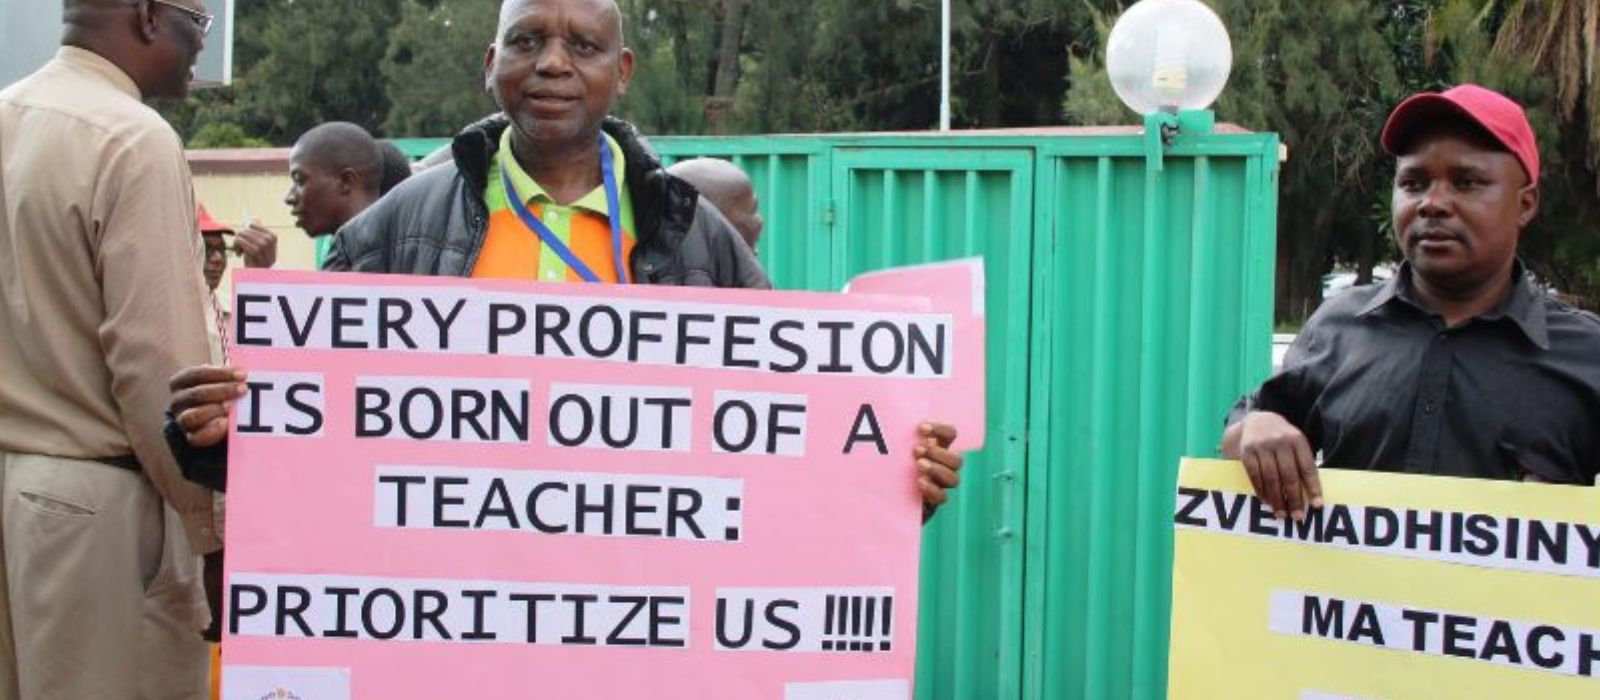 ZIMTA demands restored right to bargain, warns of ‘dire consequences’ for education